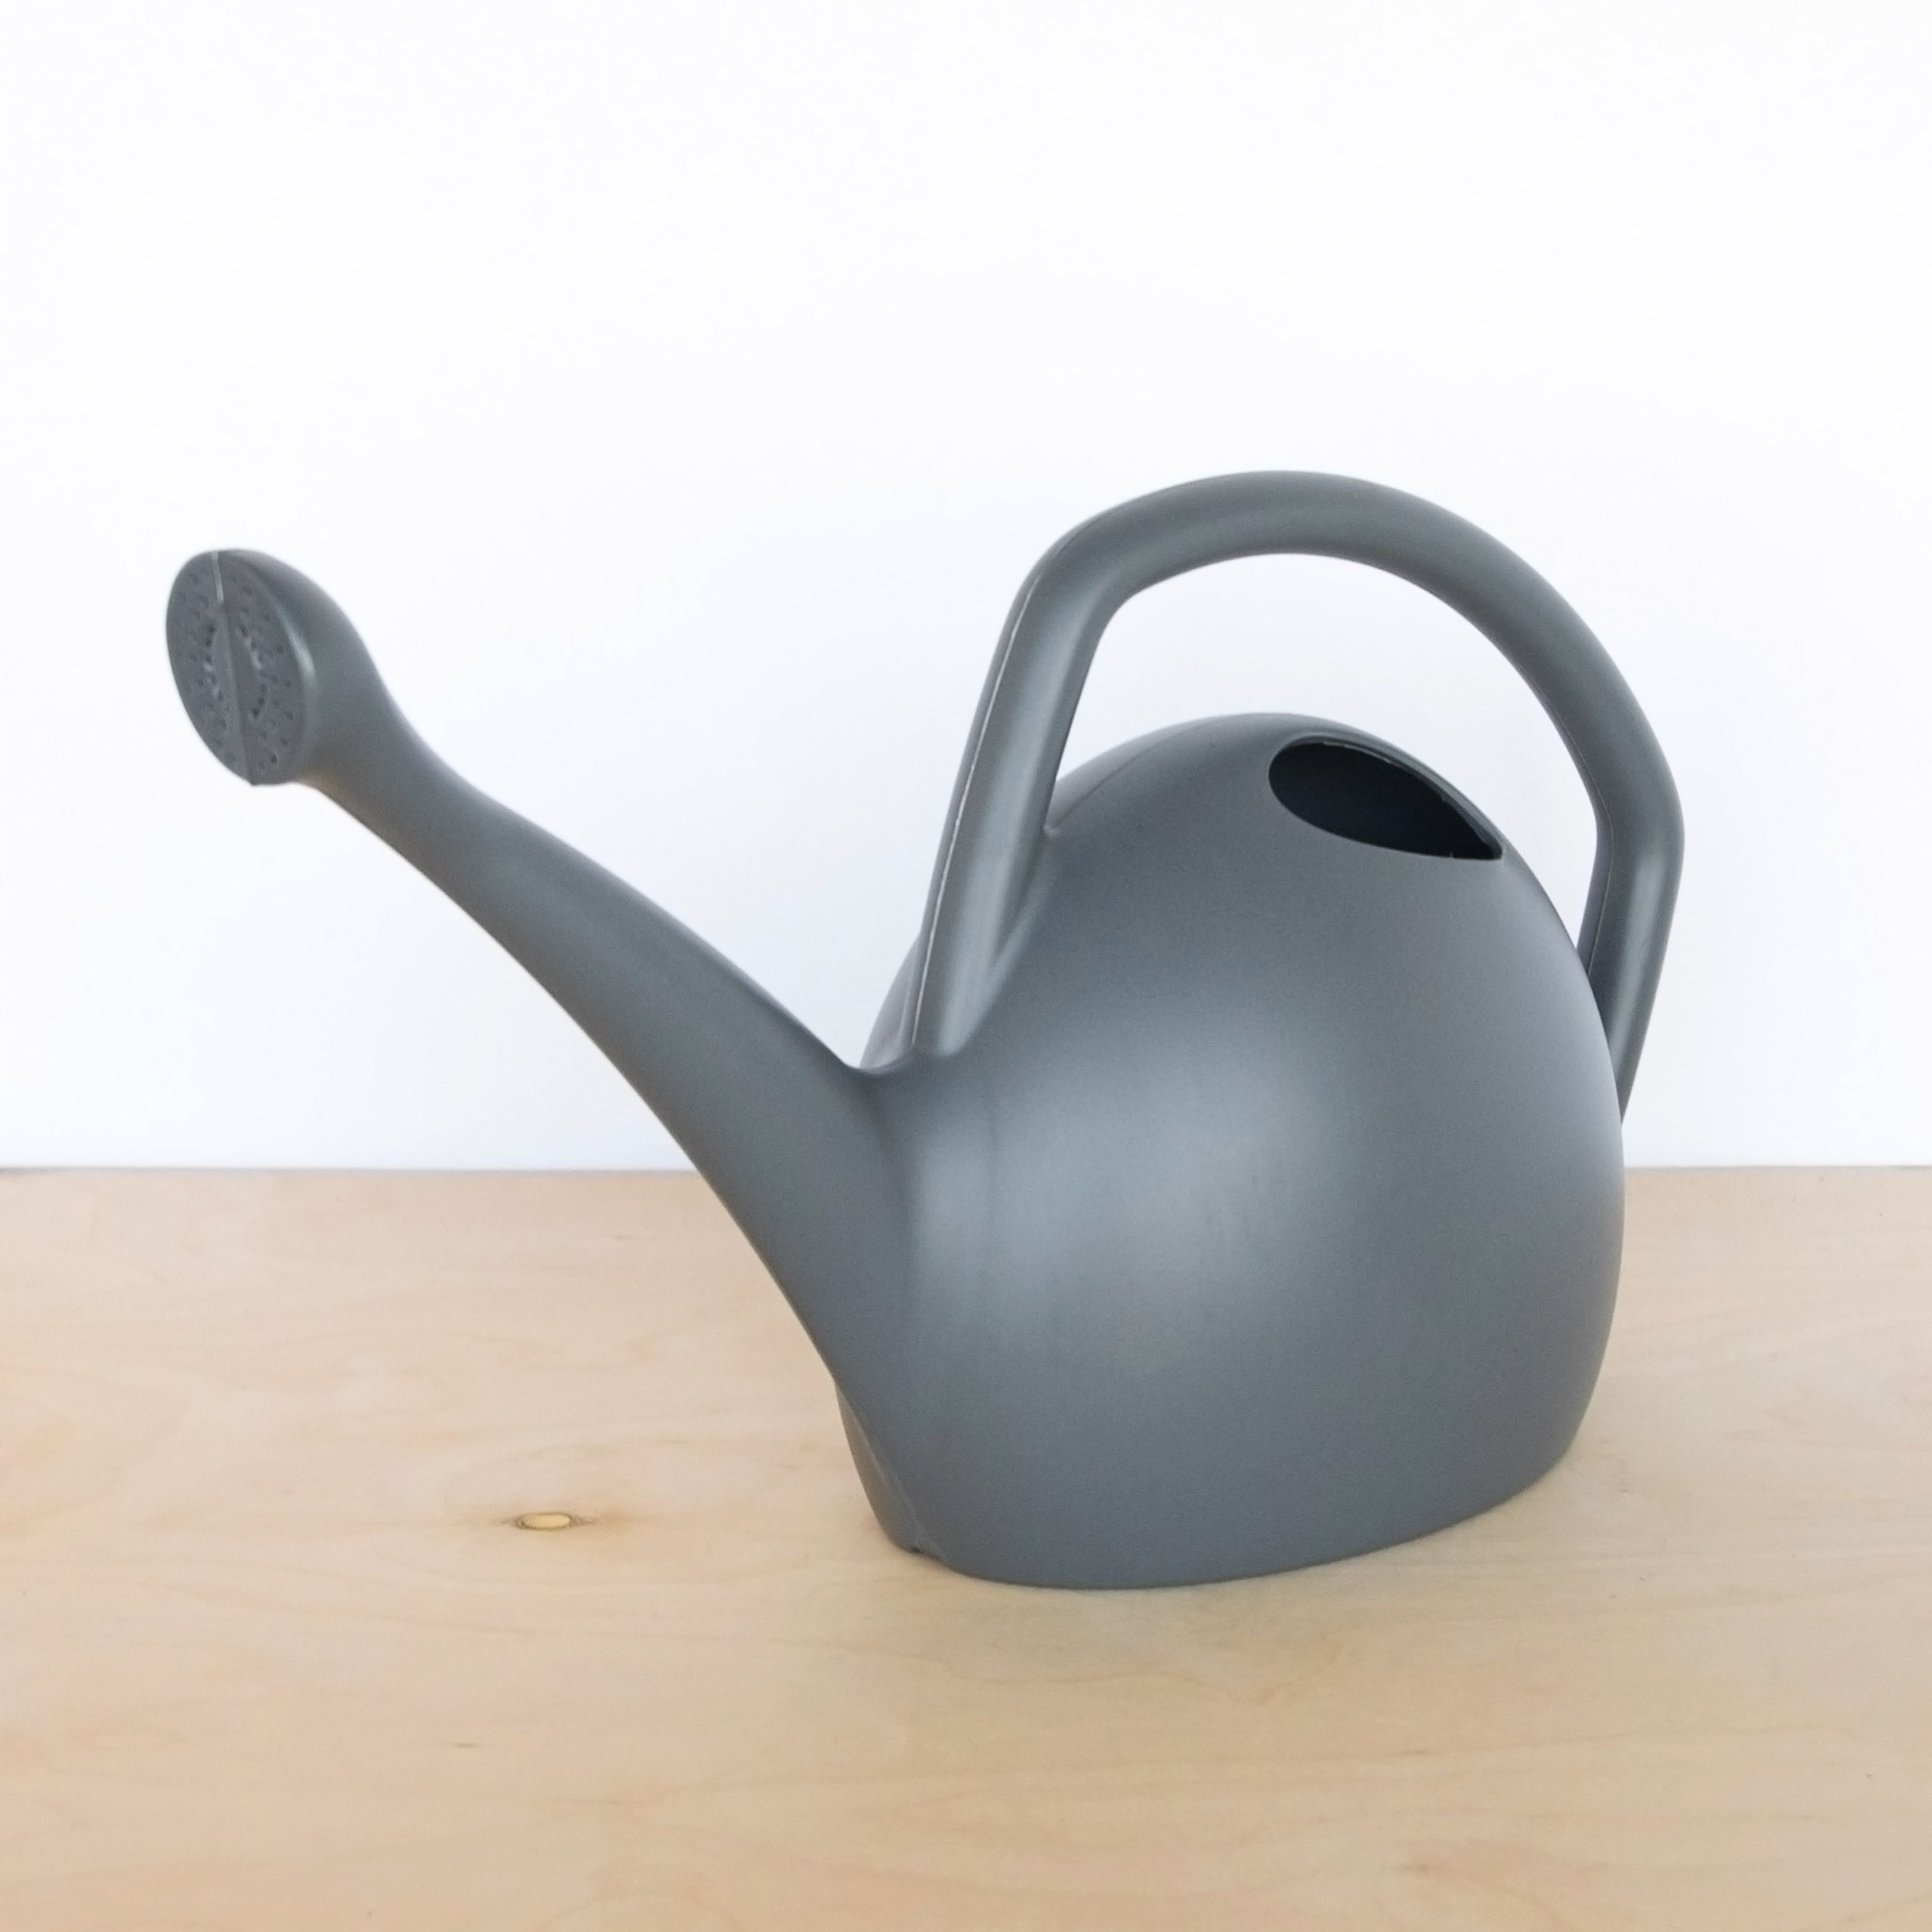 Gray, 2 gallon plastic watering can made from 100% recycled material. Attached spout and ergonomic handle.